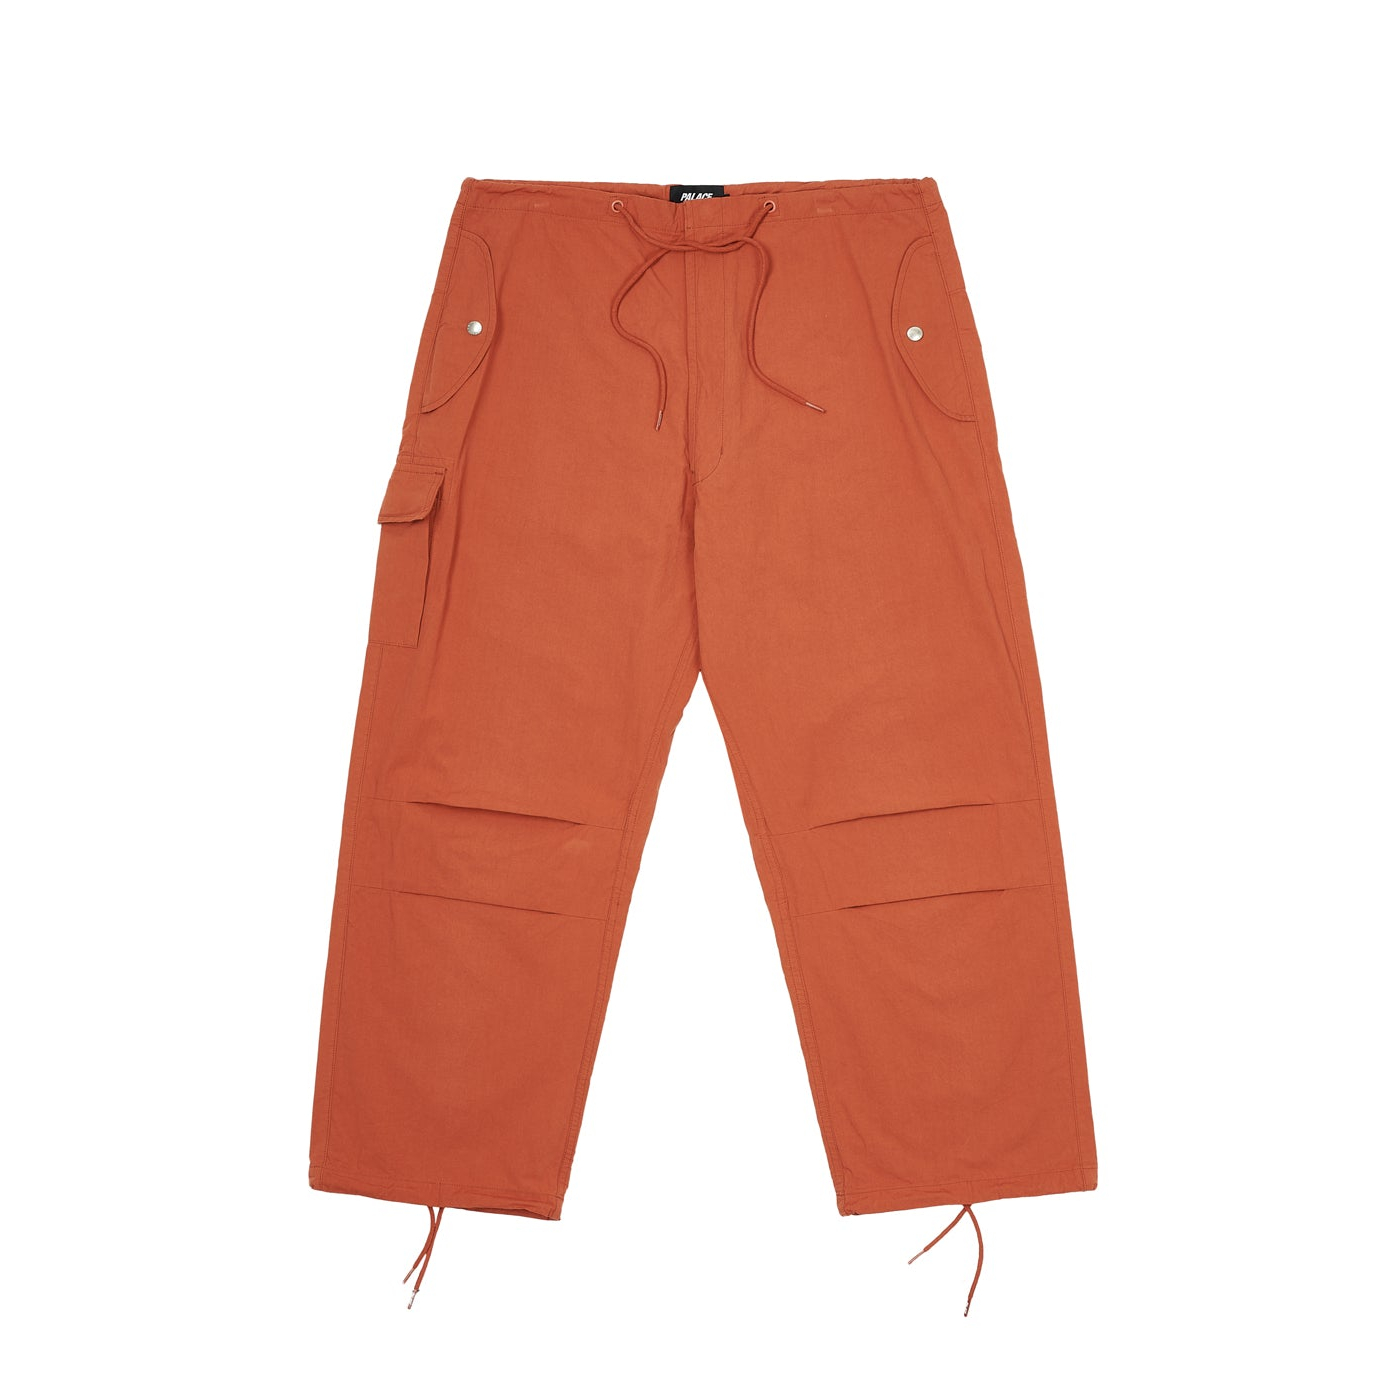 Thumbnail PALACE OVER TROUSERS TIGER ORANGE one color